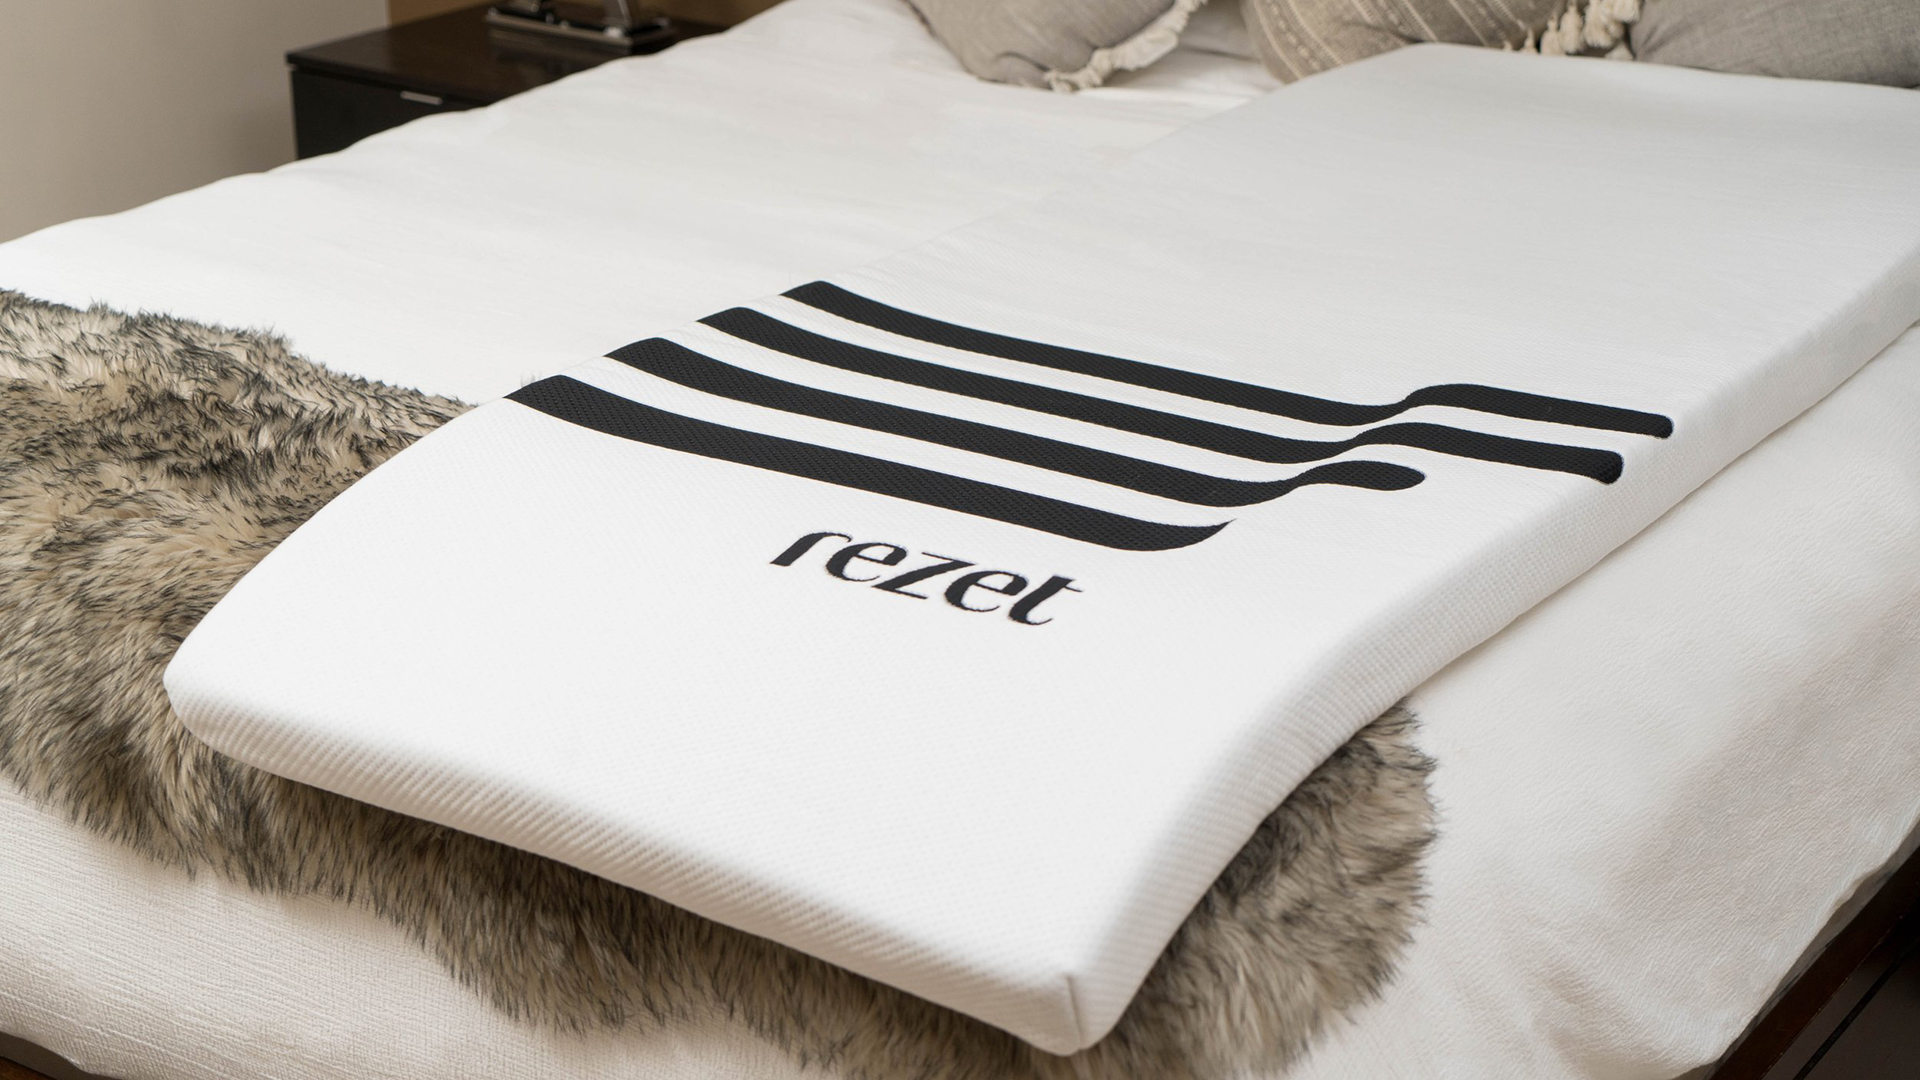 A Rezet mattress topper lying on a bed in a bedroom